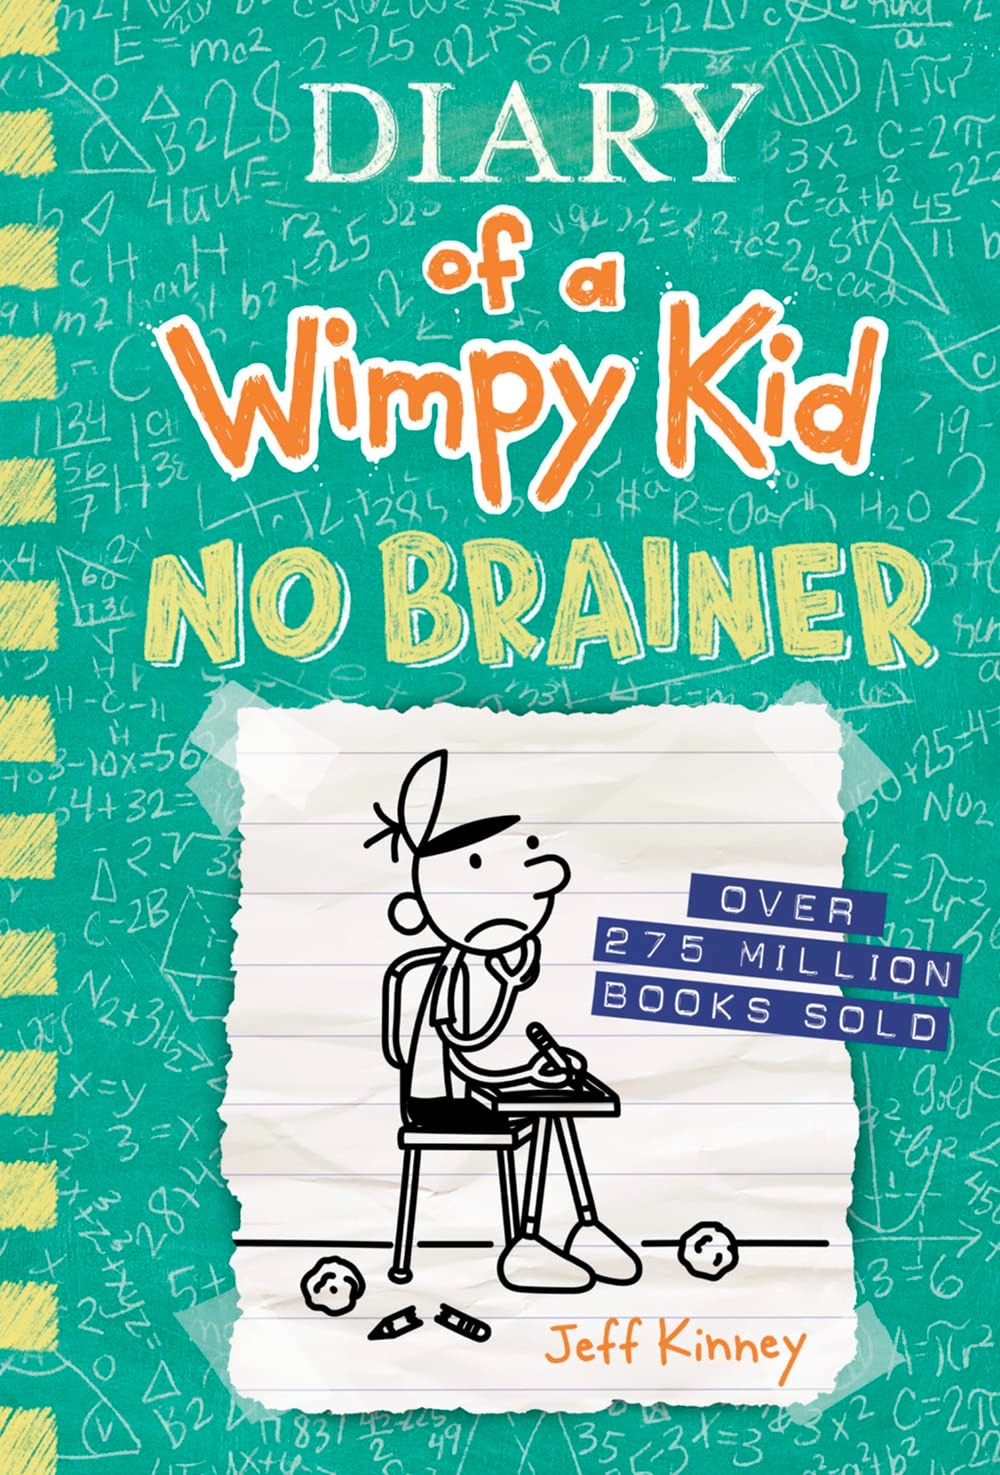 No Brainer (Diary of a Wimpy Kid Book 18) Review: A Must-Read for Wimpy Kid Fans